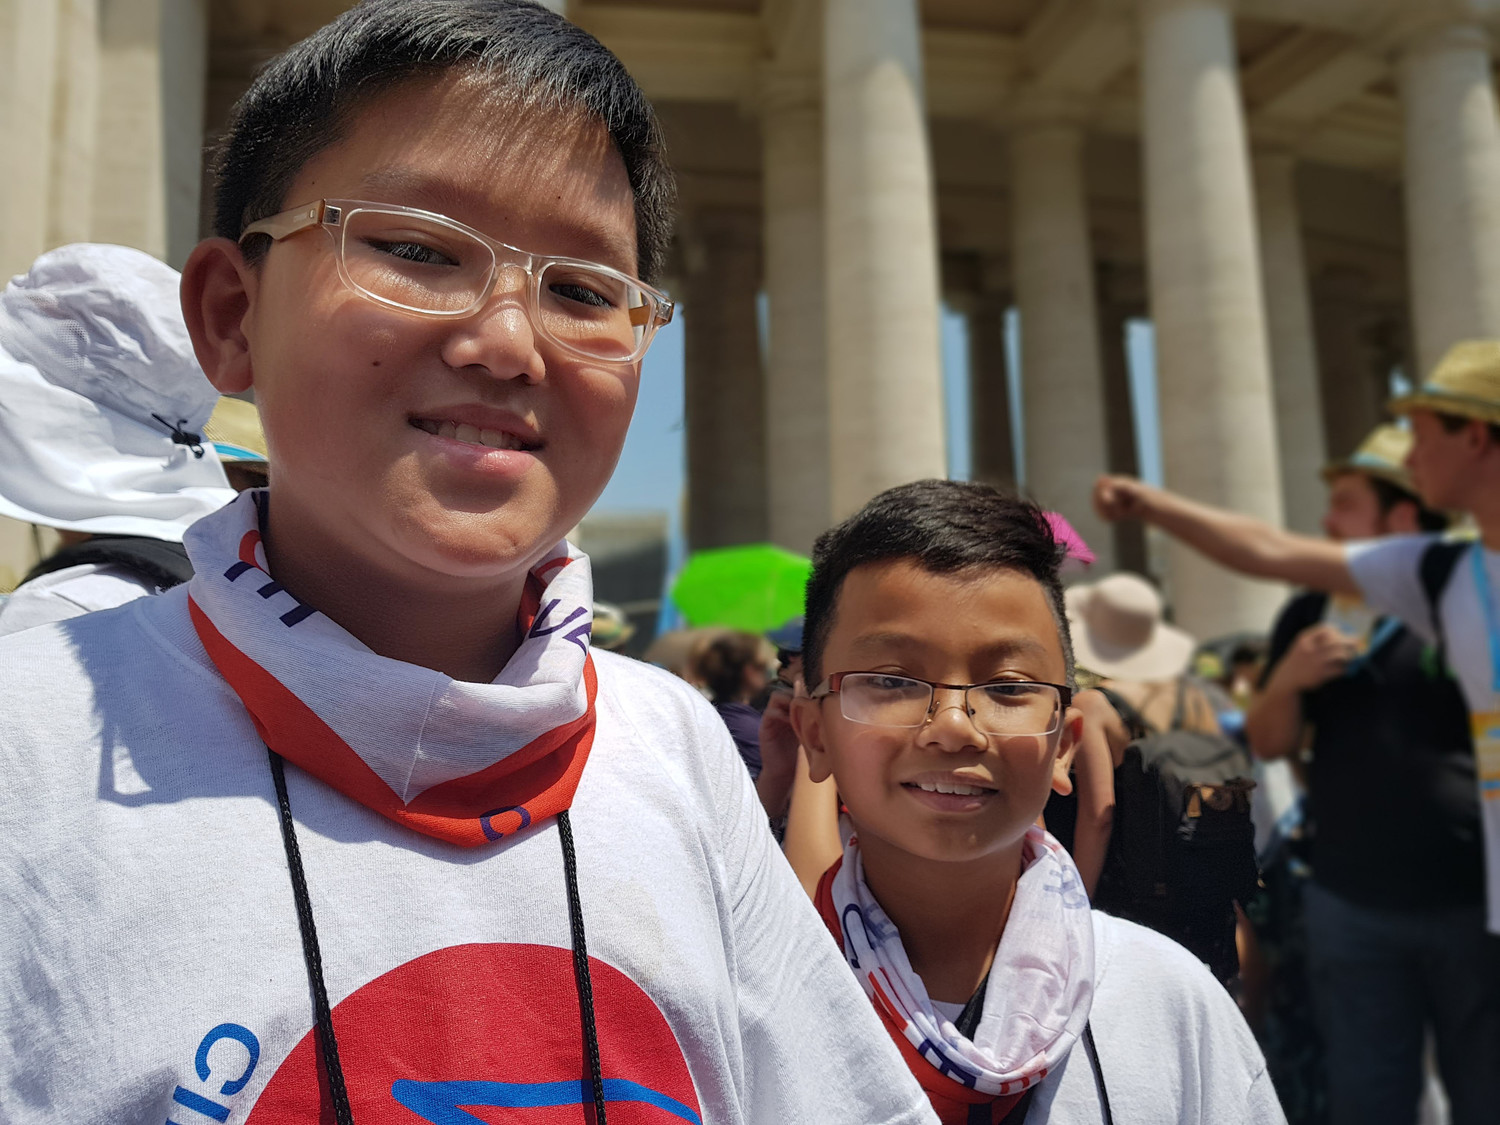 Joseph Luu and Francis Tran, altar servers from the parish of Mary, Queen of Vietnam in New Orleans, Louisiana, wait to enter St. Peter’s Square at the Vatican for an international meeting of altar servers July 31. The pilgrimage, sponsored by the German bishops’ conference, included tens of thousands of Germans ages 13 to 23 and altar servers from 18 countries.